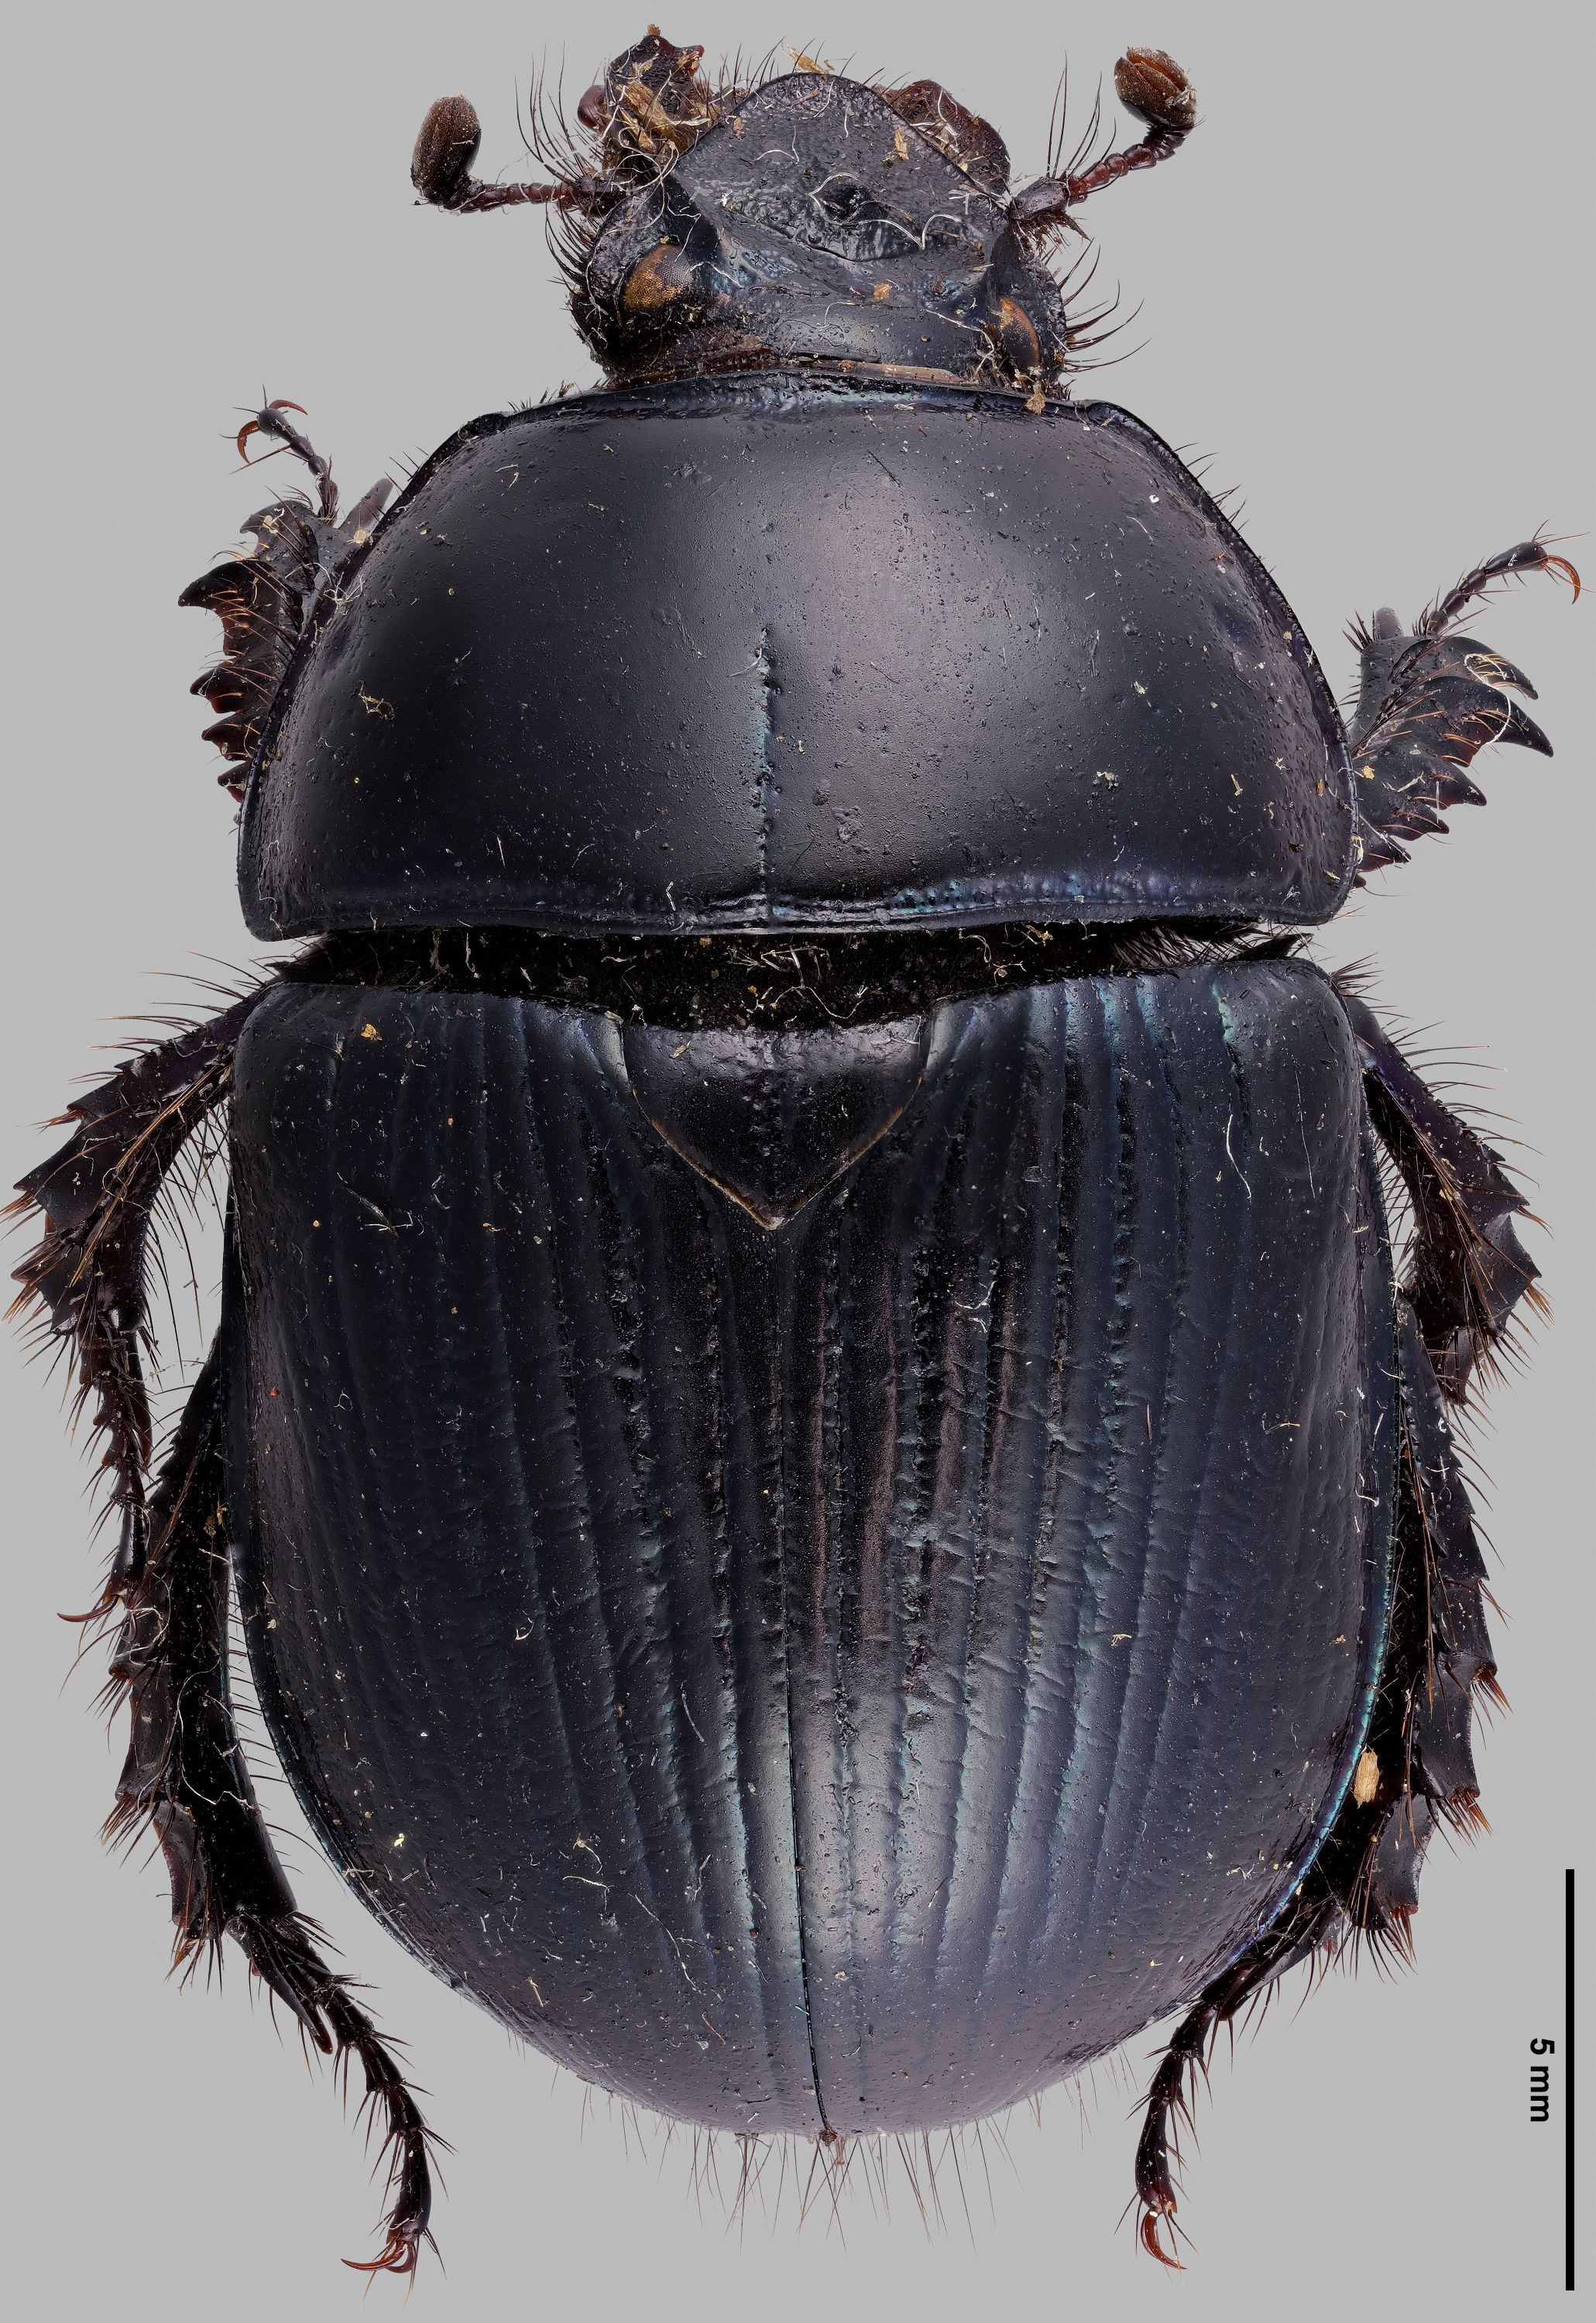 Earth-boring dung beetles - Geotrupidae, Overview